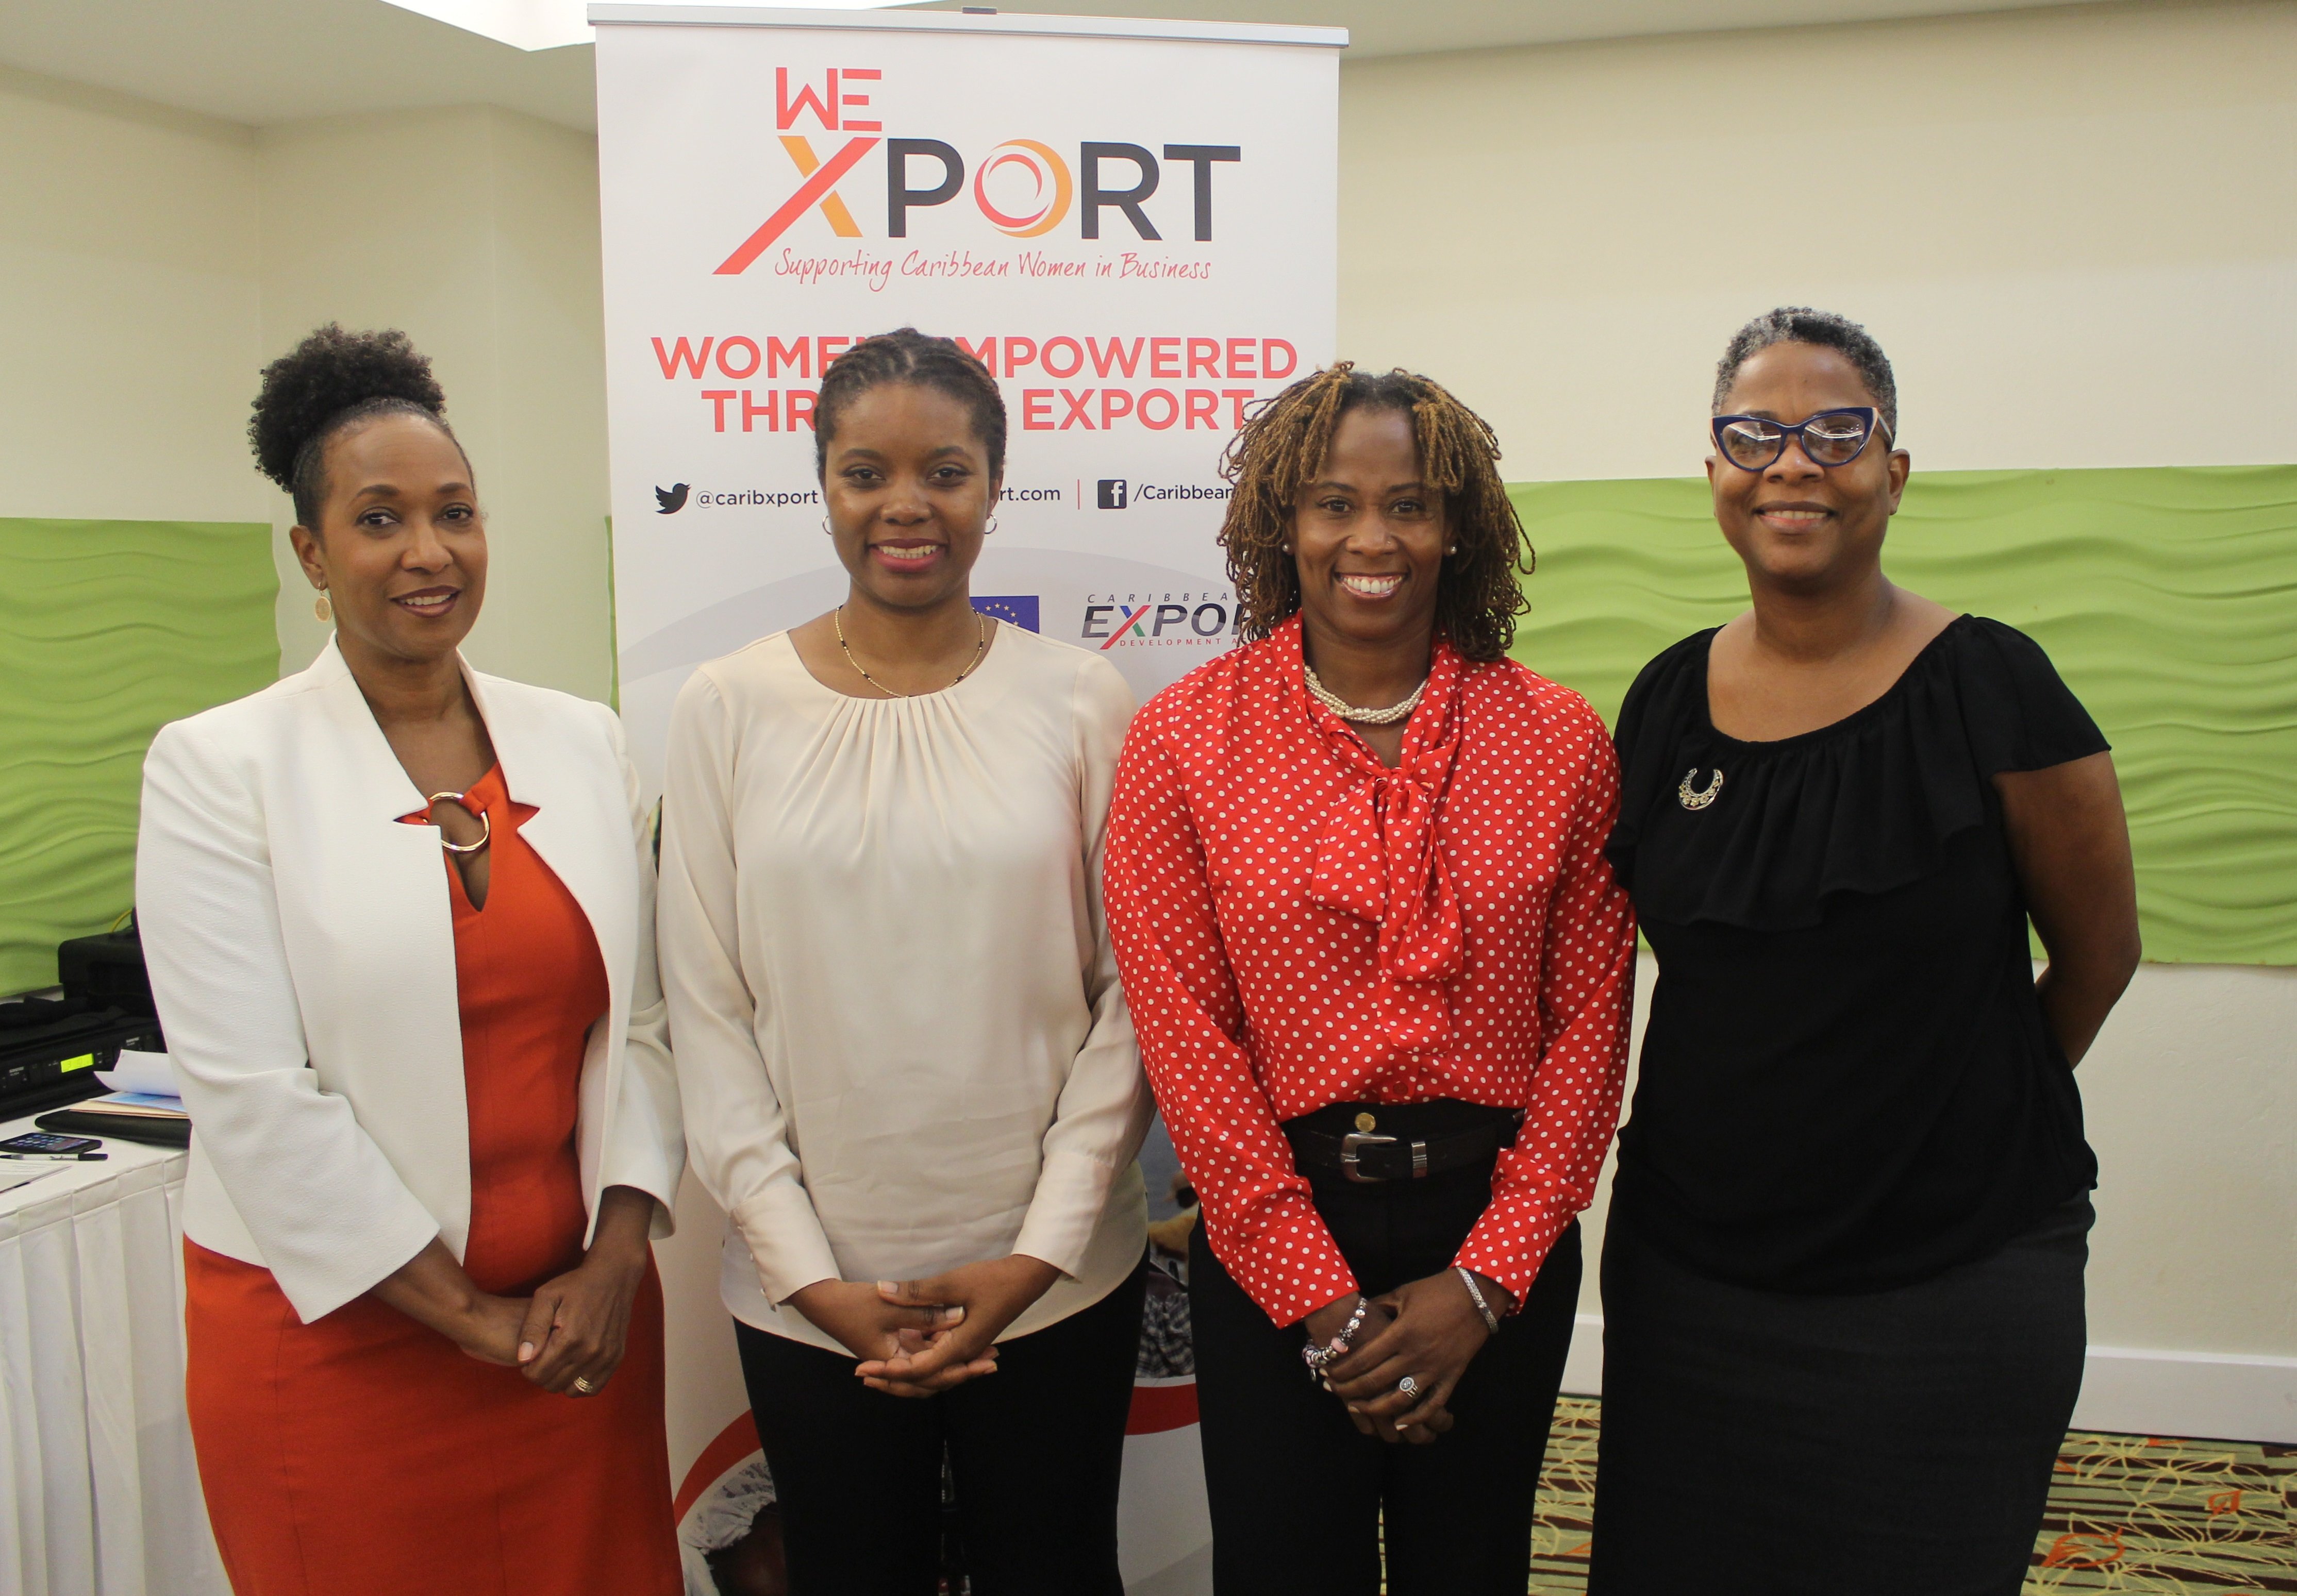 Left to Right: Pamela Coke-Hamilton, Executive Director, Caribbean Export, with WE-Xport funding partners Isiuwa Iyahen, Programme Specialist, Women’s Economic Empowerment, UN Women; Lisa Harding, Micro, Small and Medium Enterprise Development Coordinator, Technical Cooperation Division, CDB and Camille Wildman, Project Officer-Private Sector Specialist at the Delegation of the European Union to Barbados, the Eastern Caribbean States, the OECS and CARICOM/CARIFORUM.